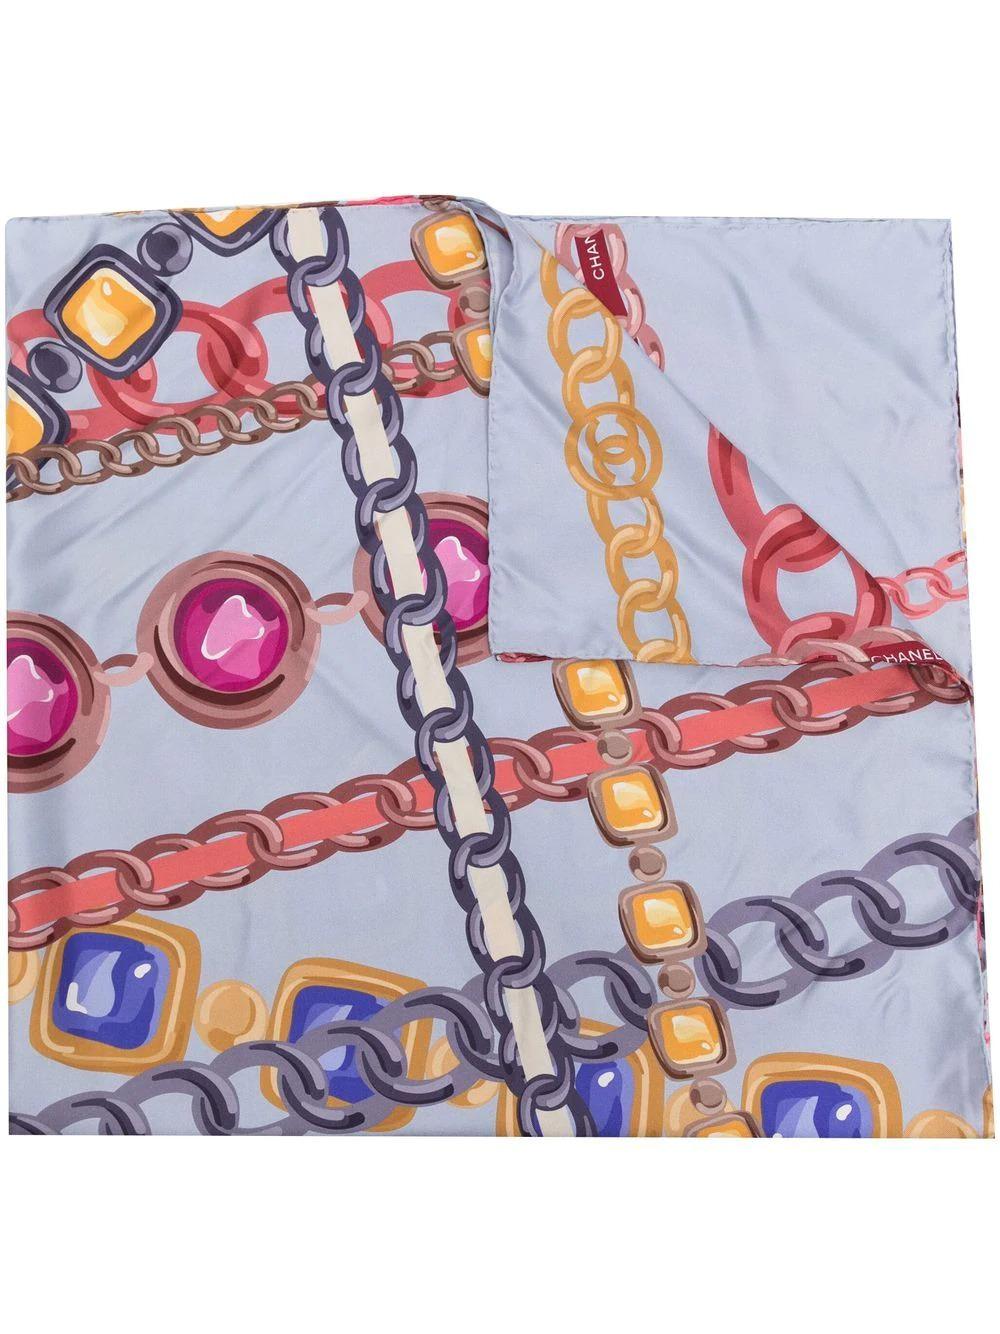 Displaying a number of Chains inspired by classic Chanel necklaces such as the Maison's famous Gripoix jewellery and chain belts, this pre-owned blue silk scarf has been finished with the brand's iconic Chanel logo. Twist it through your hair or